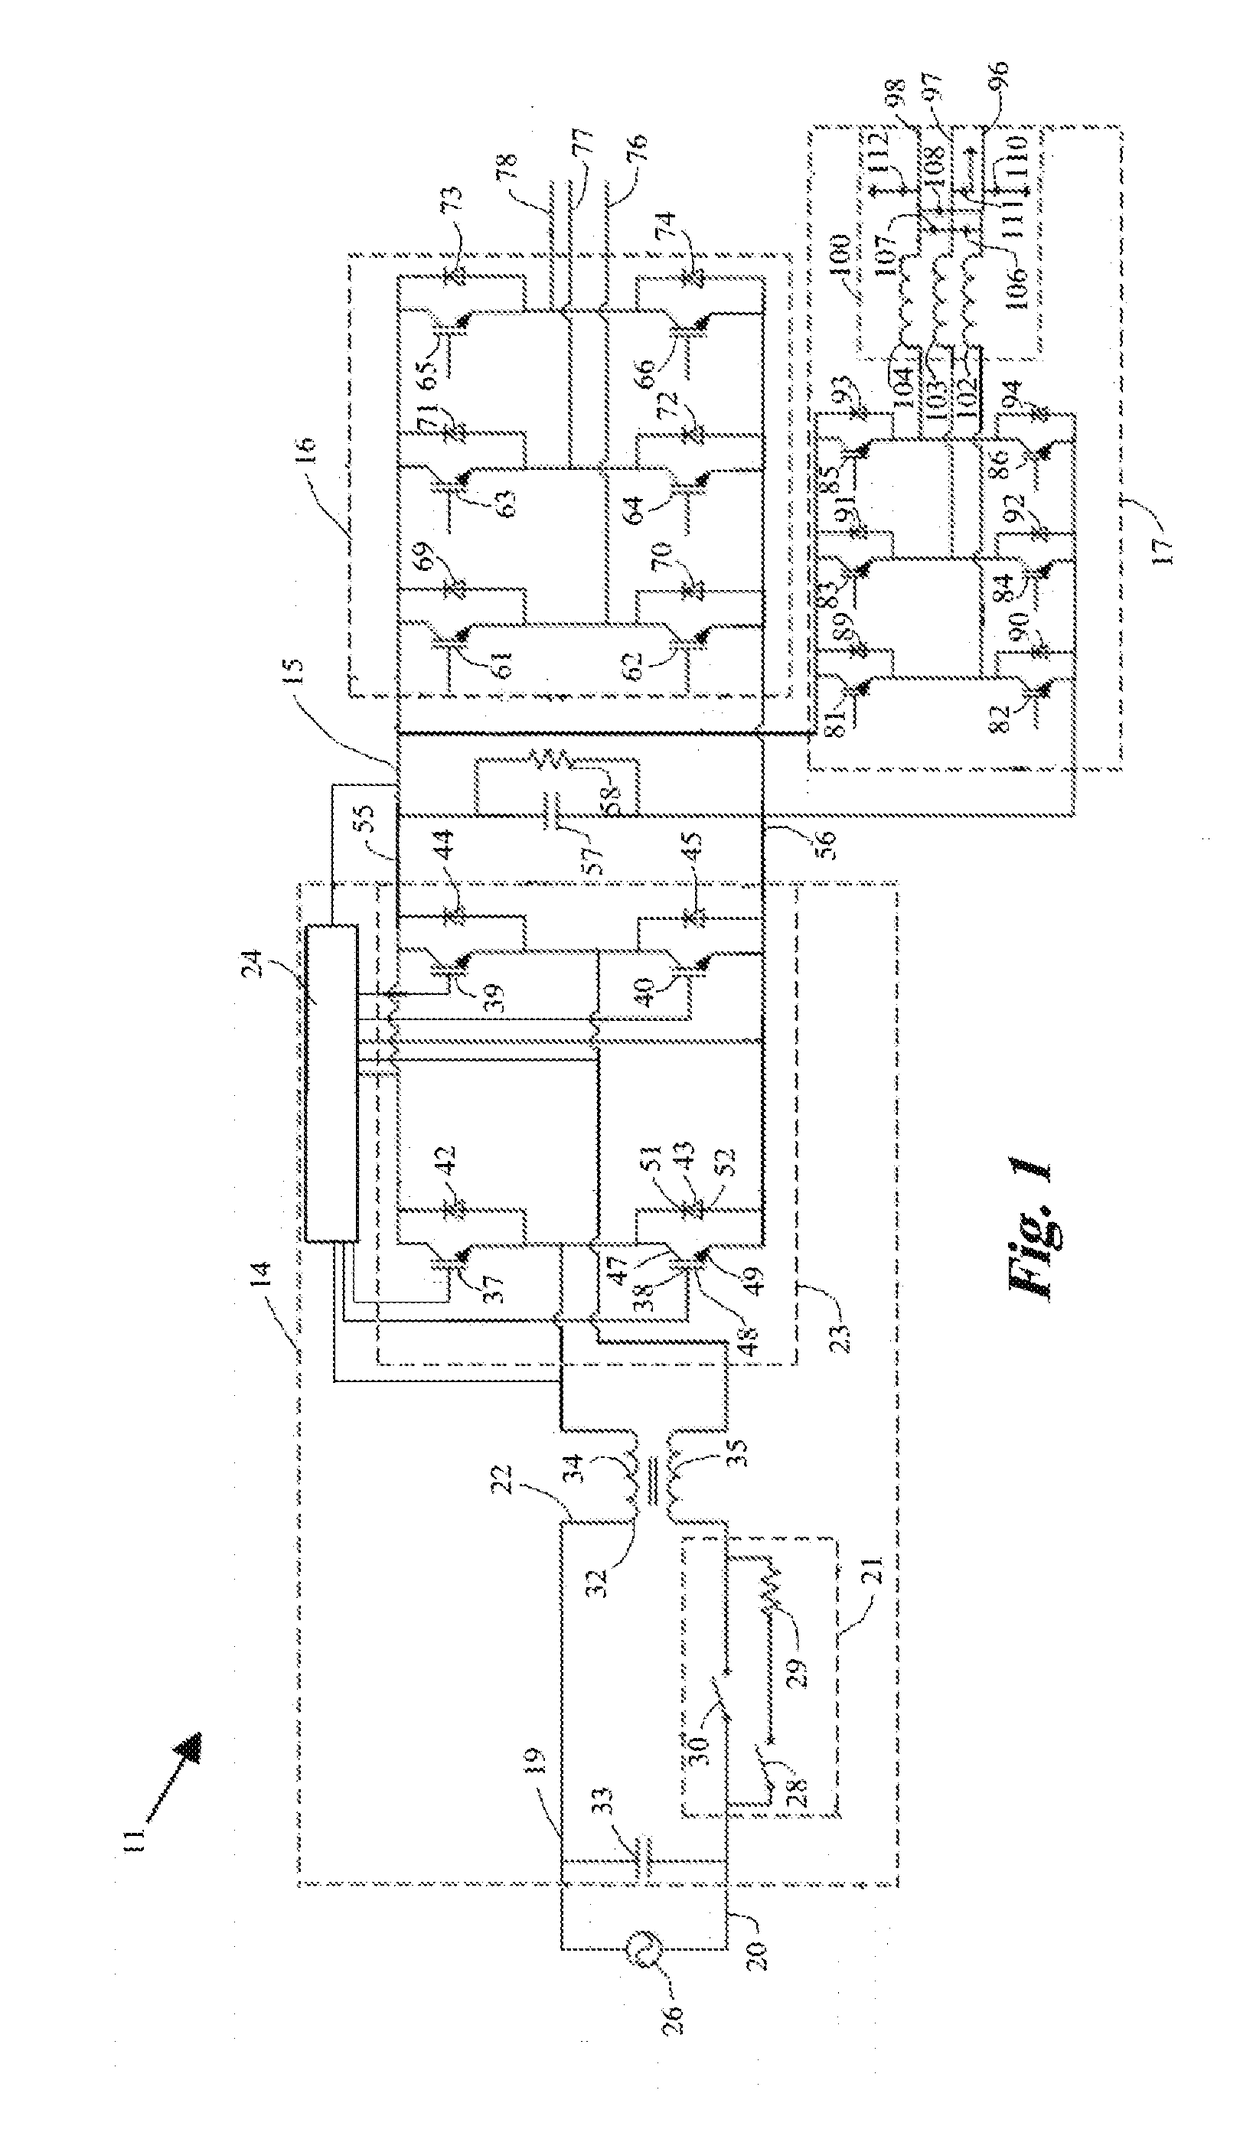 Regenerative variable frequency drive with auxiliary power supply